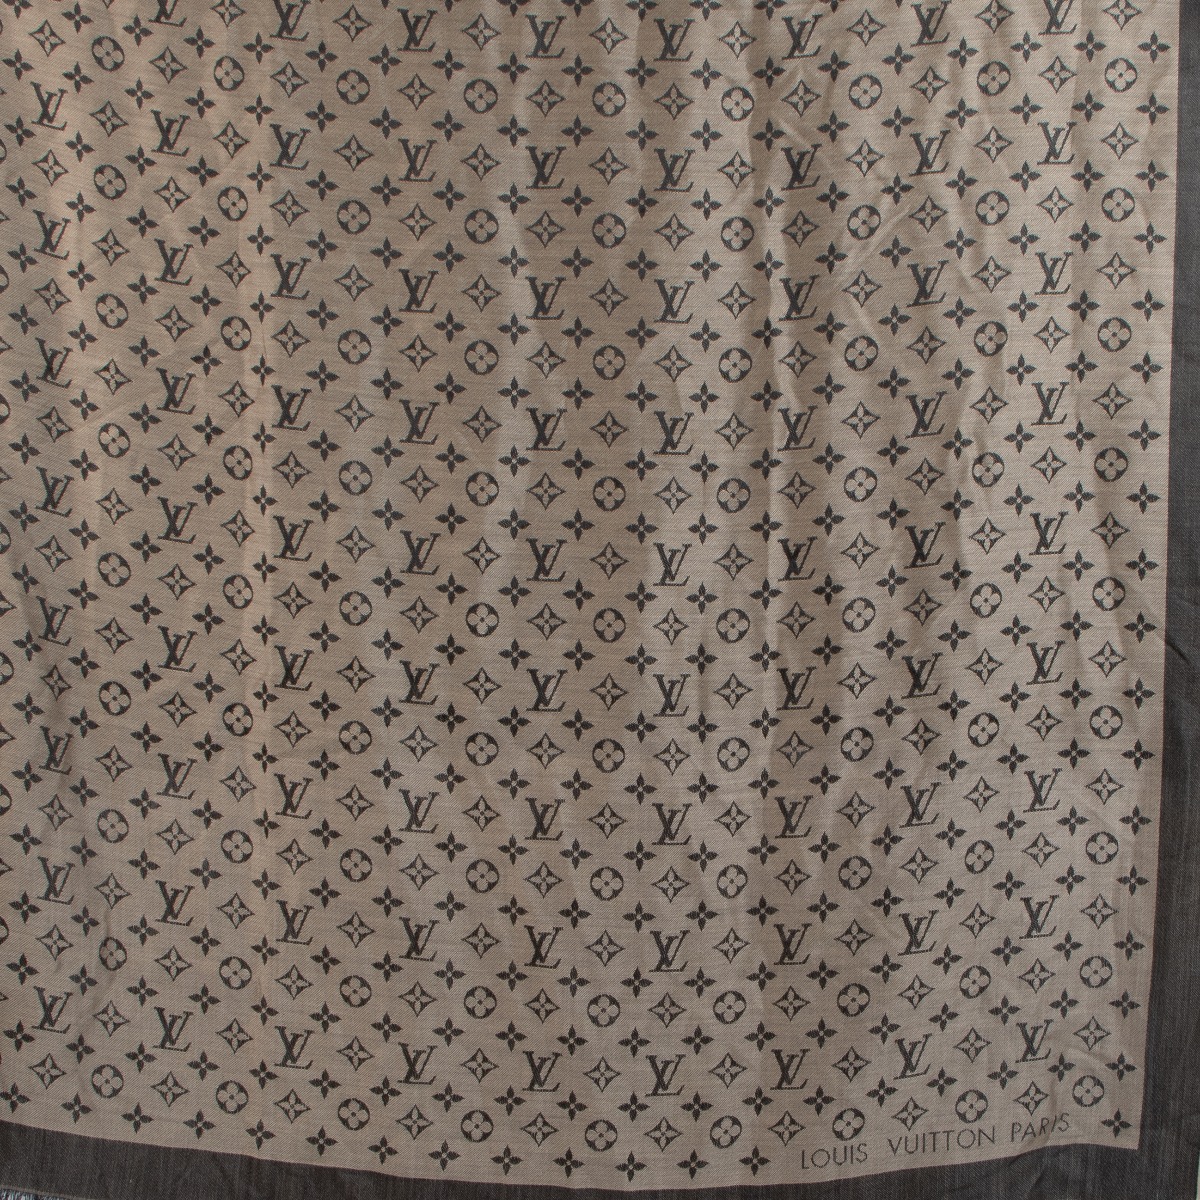 Bidinstyle on X: the LV Monogram Denim shawl is up for bids at a